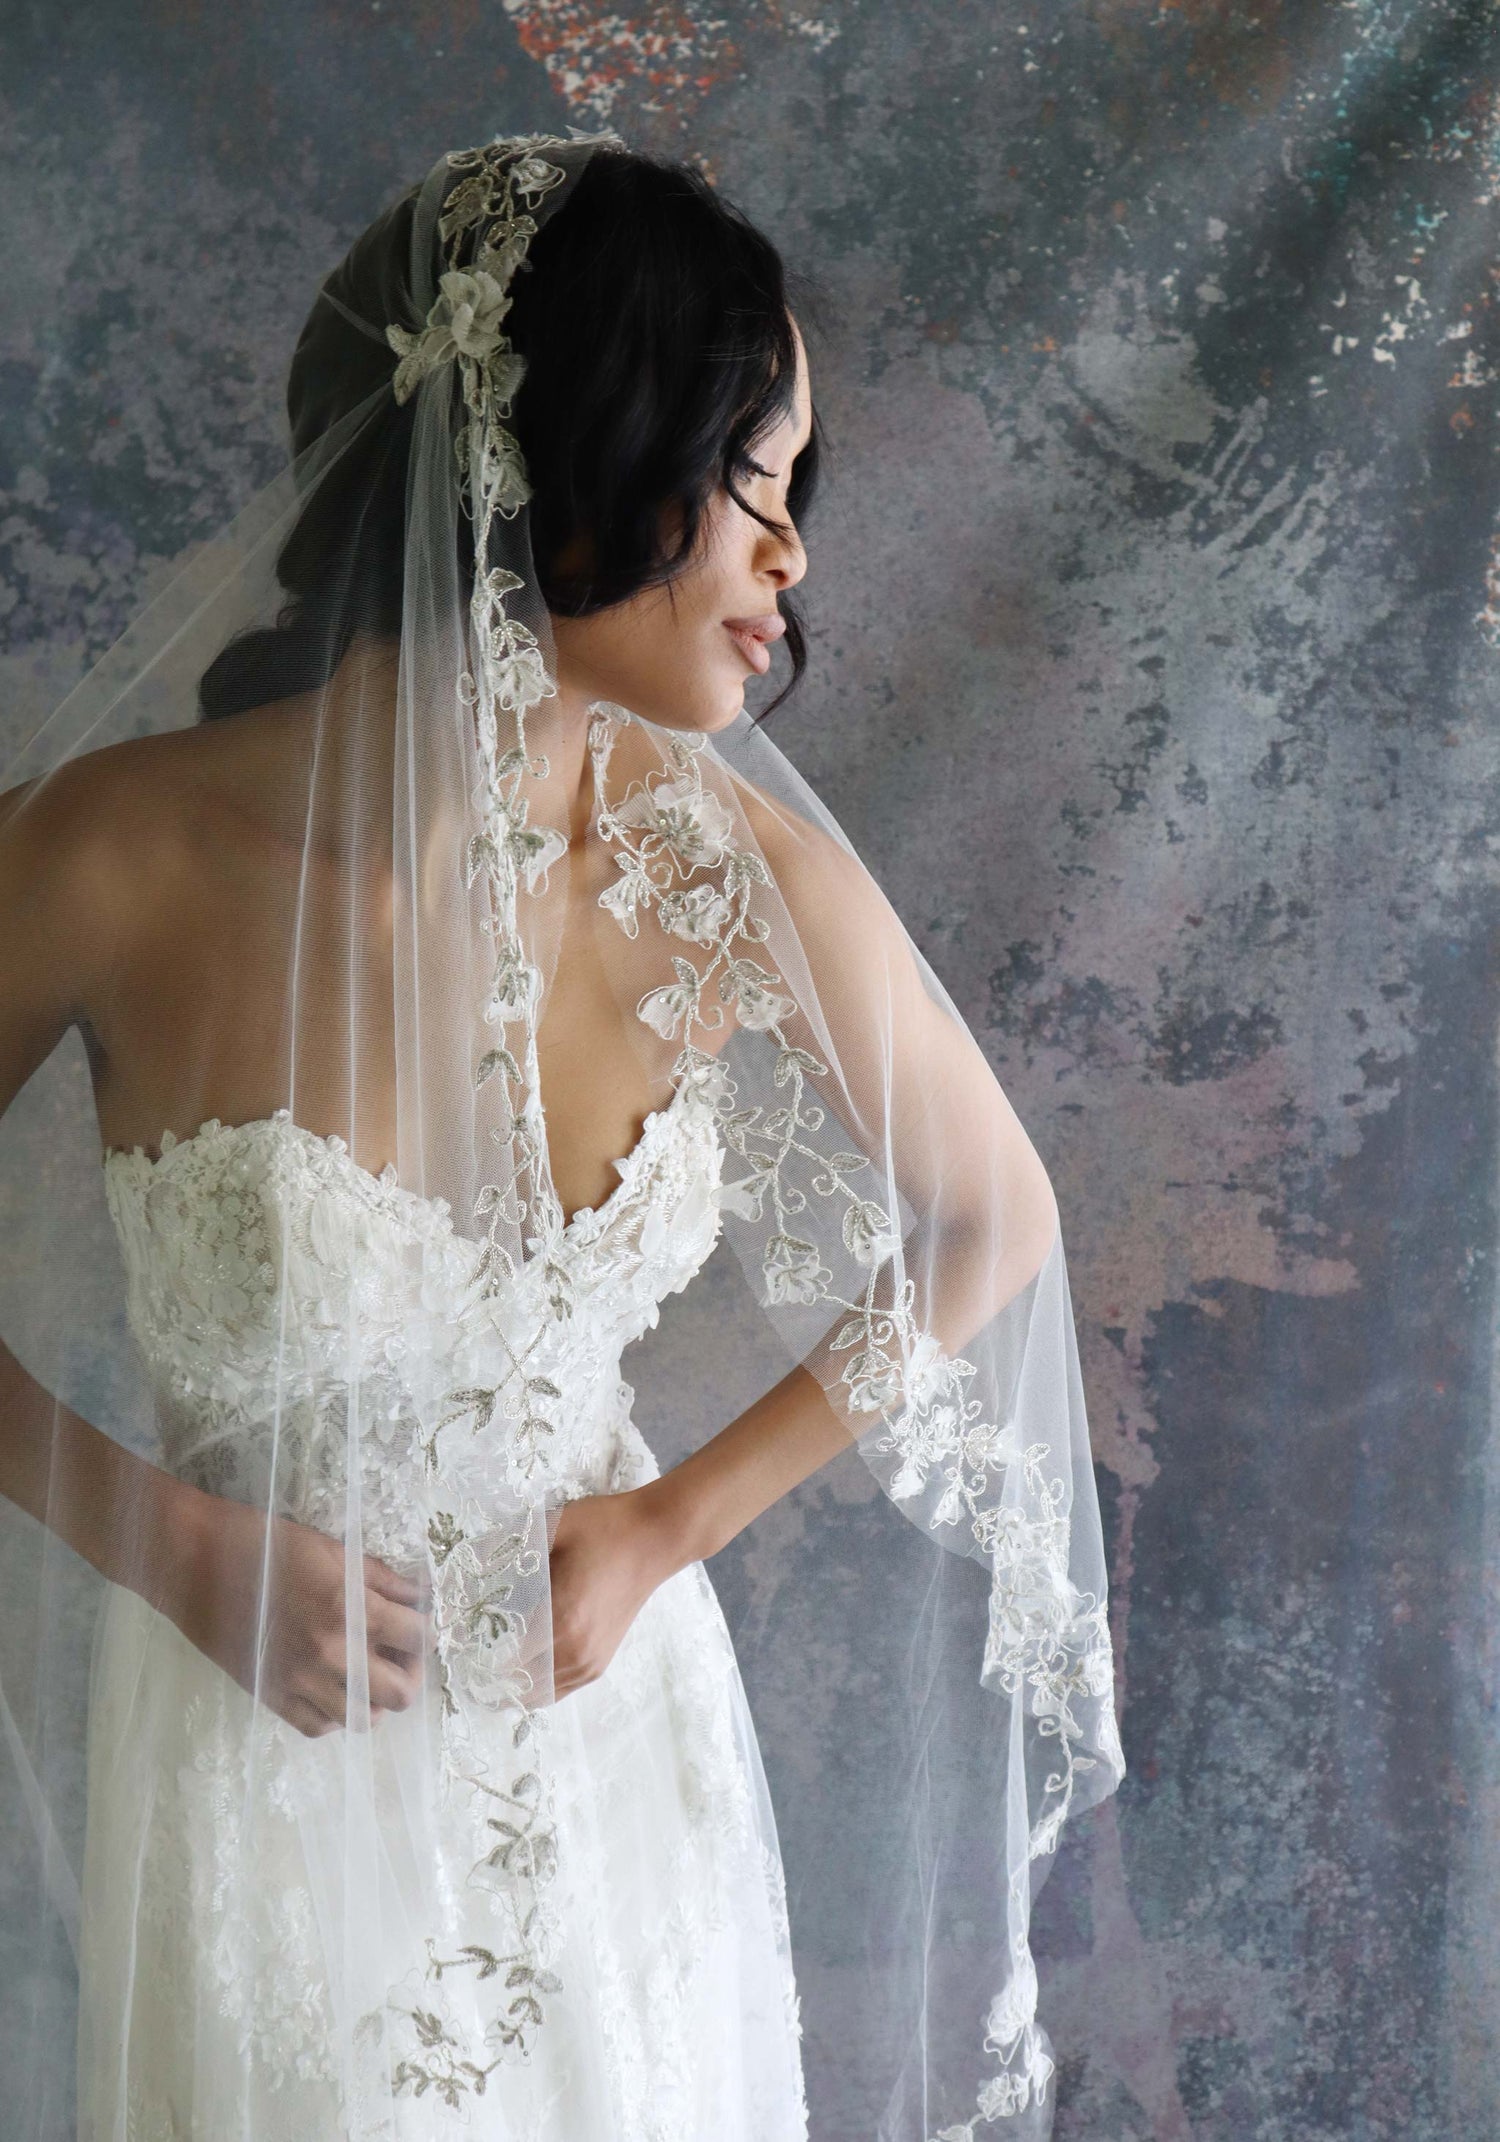 Short Veil with Lace Fabric Flowers